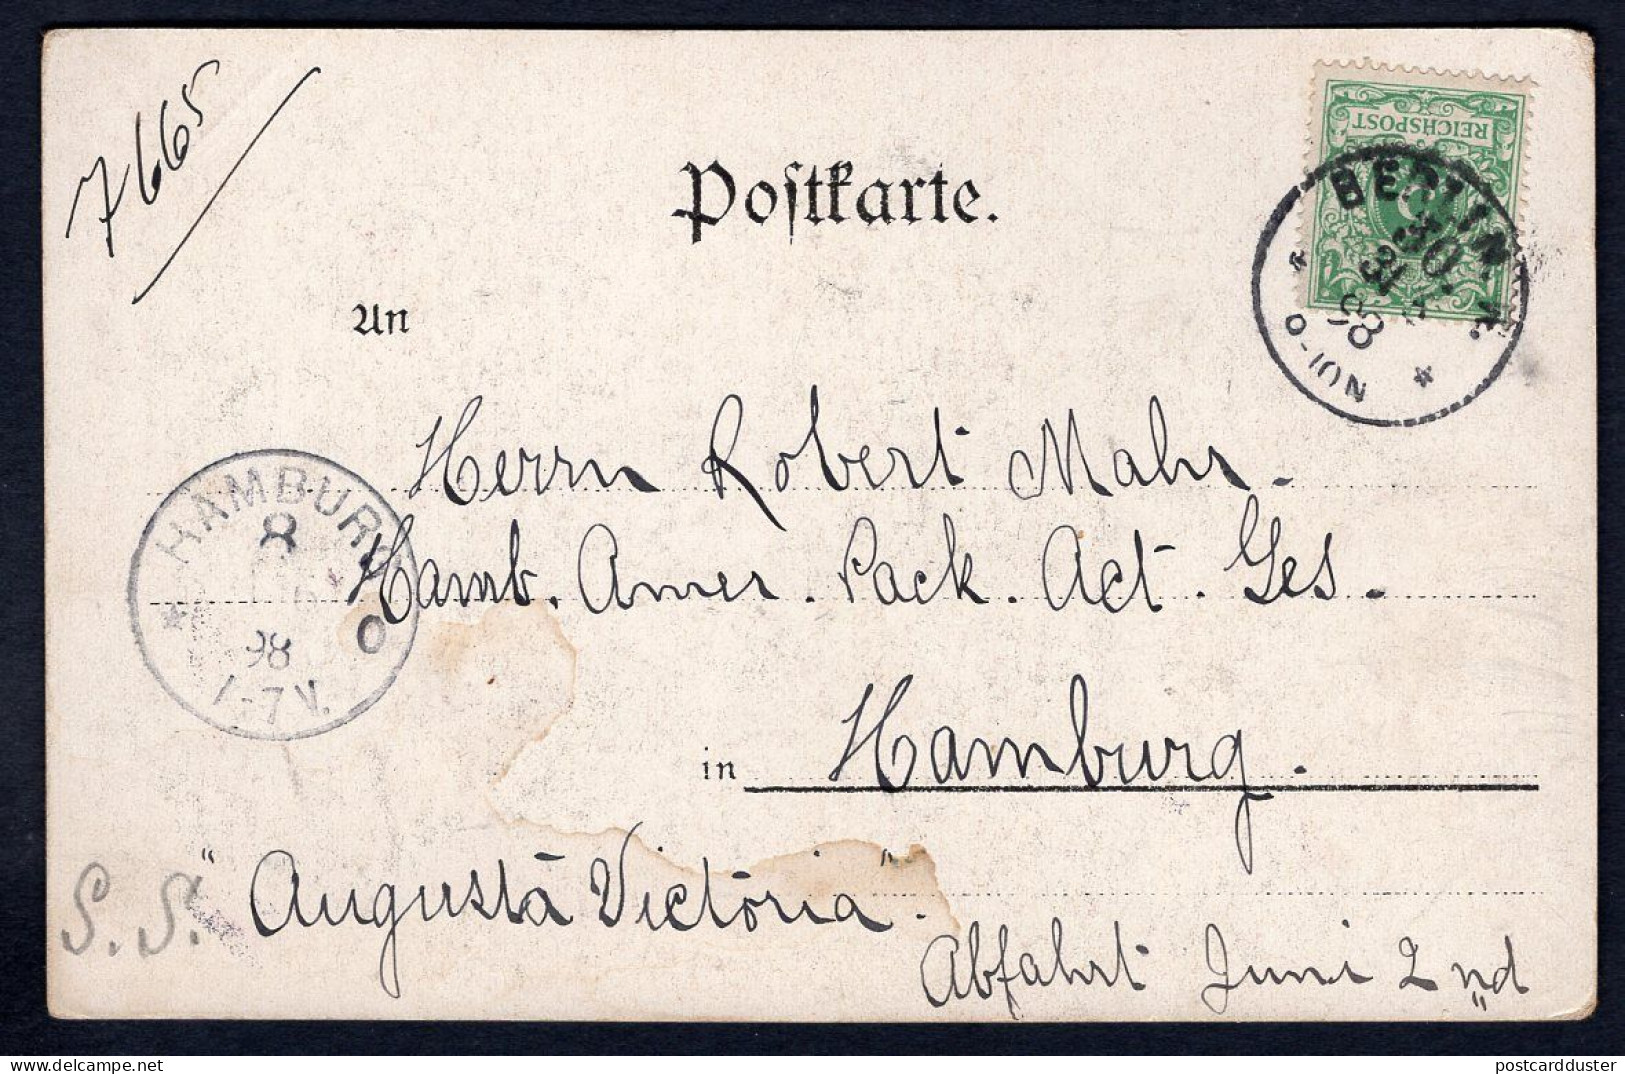 Germany 1898 Humor. Gnome Firing Cannon. Hearts, Love, Valentine's. Frogs. Old Postcard  (h5176) - Humour